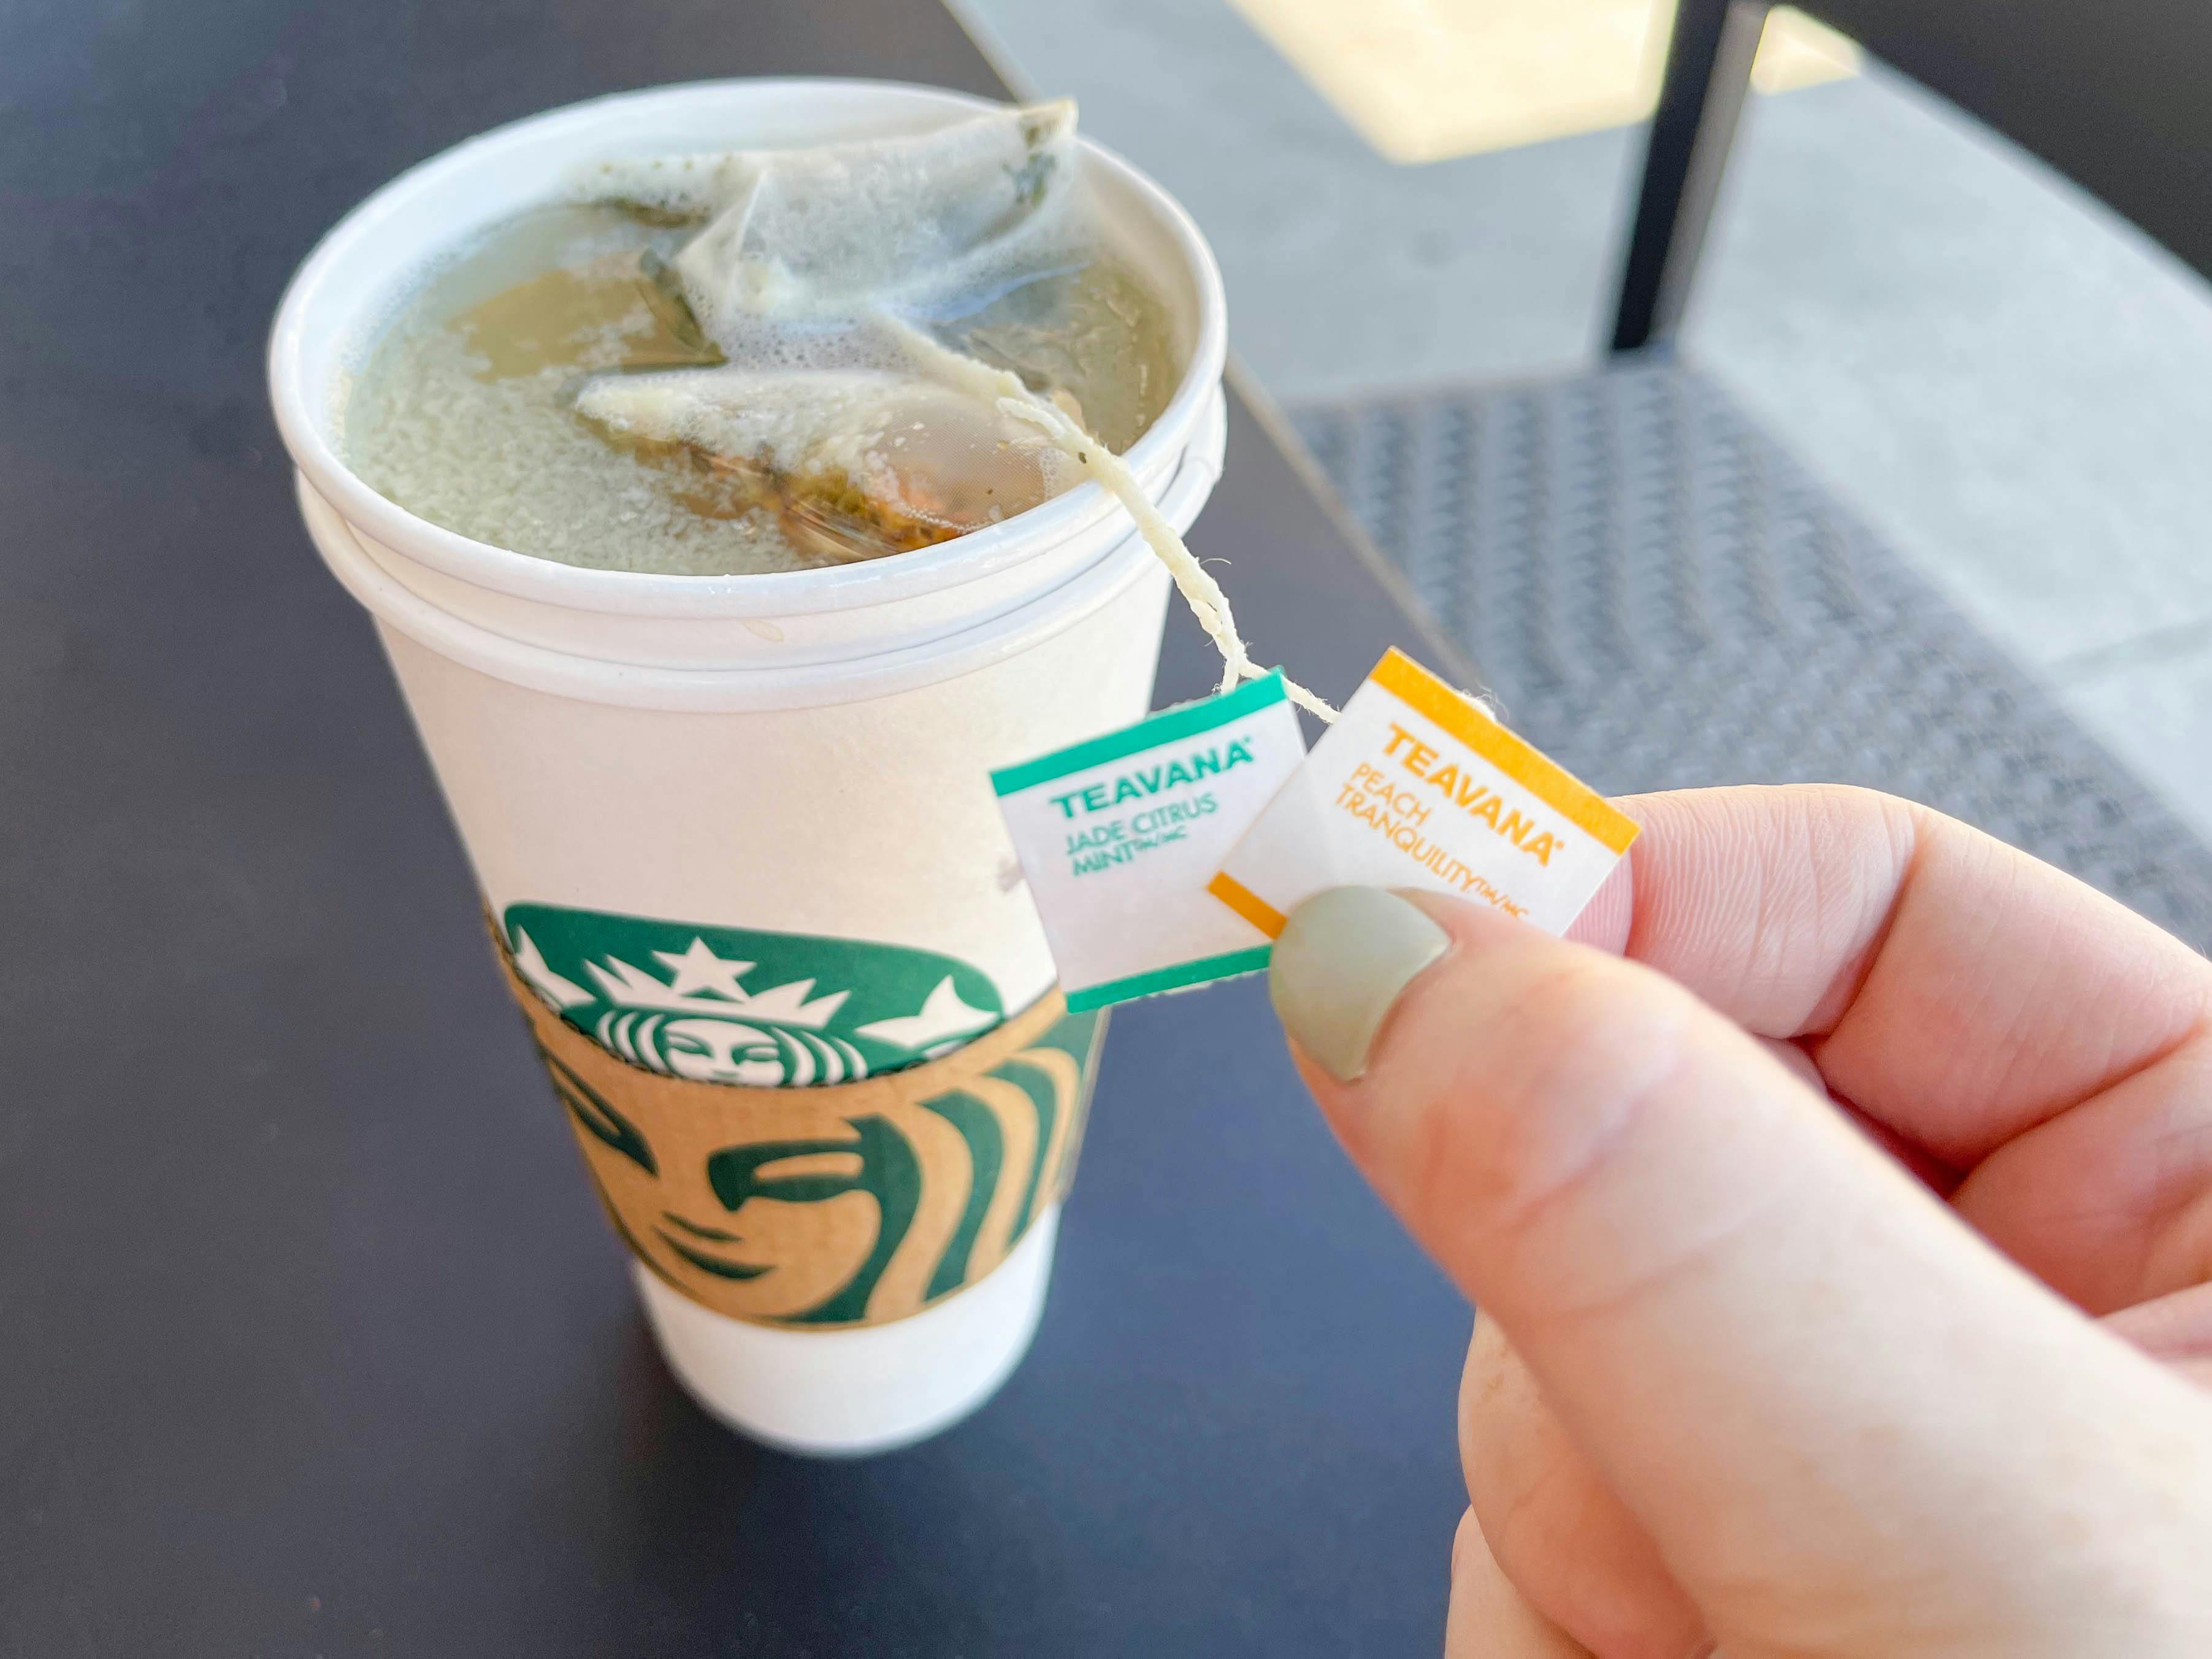 A Starbucks tea sitting on a table with the tea bags labels being held up.